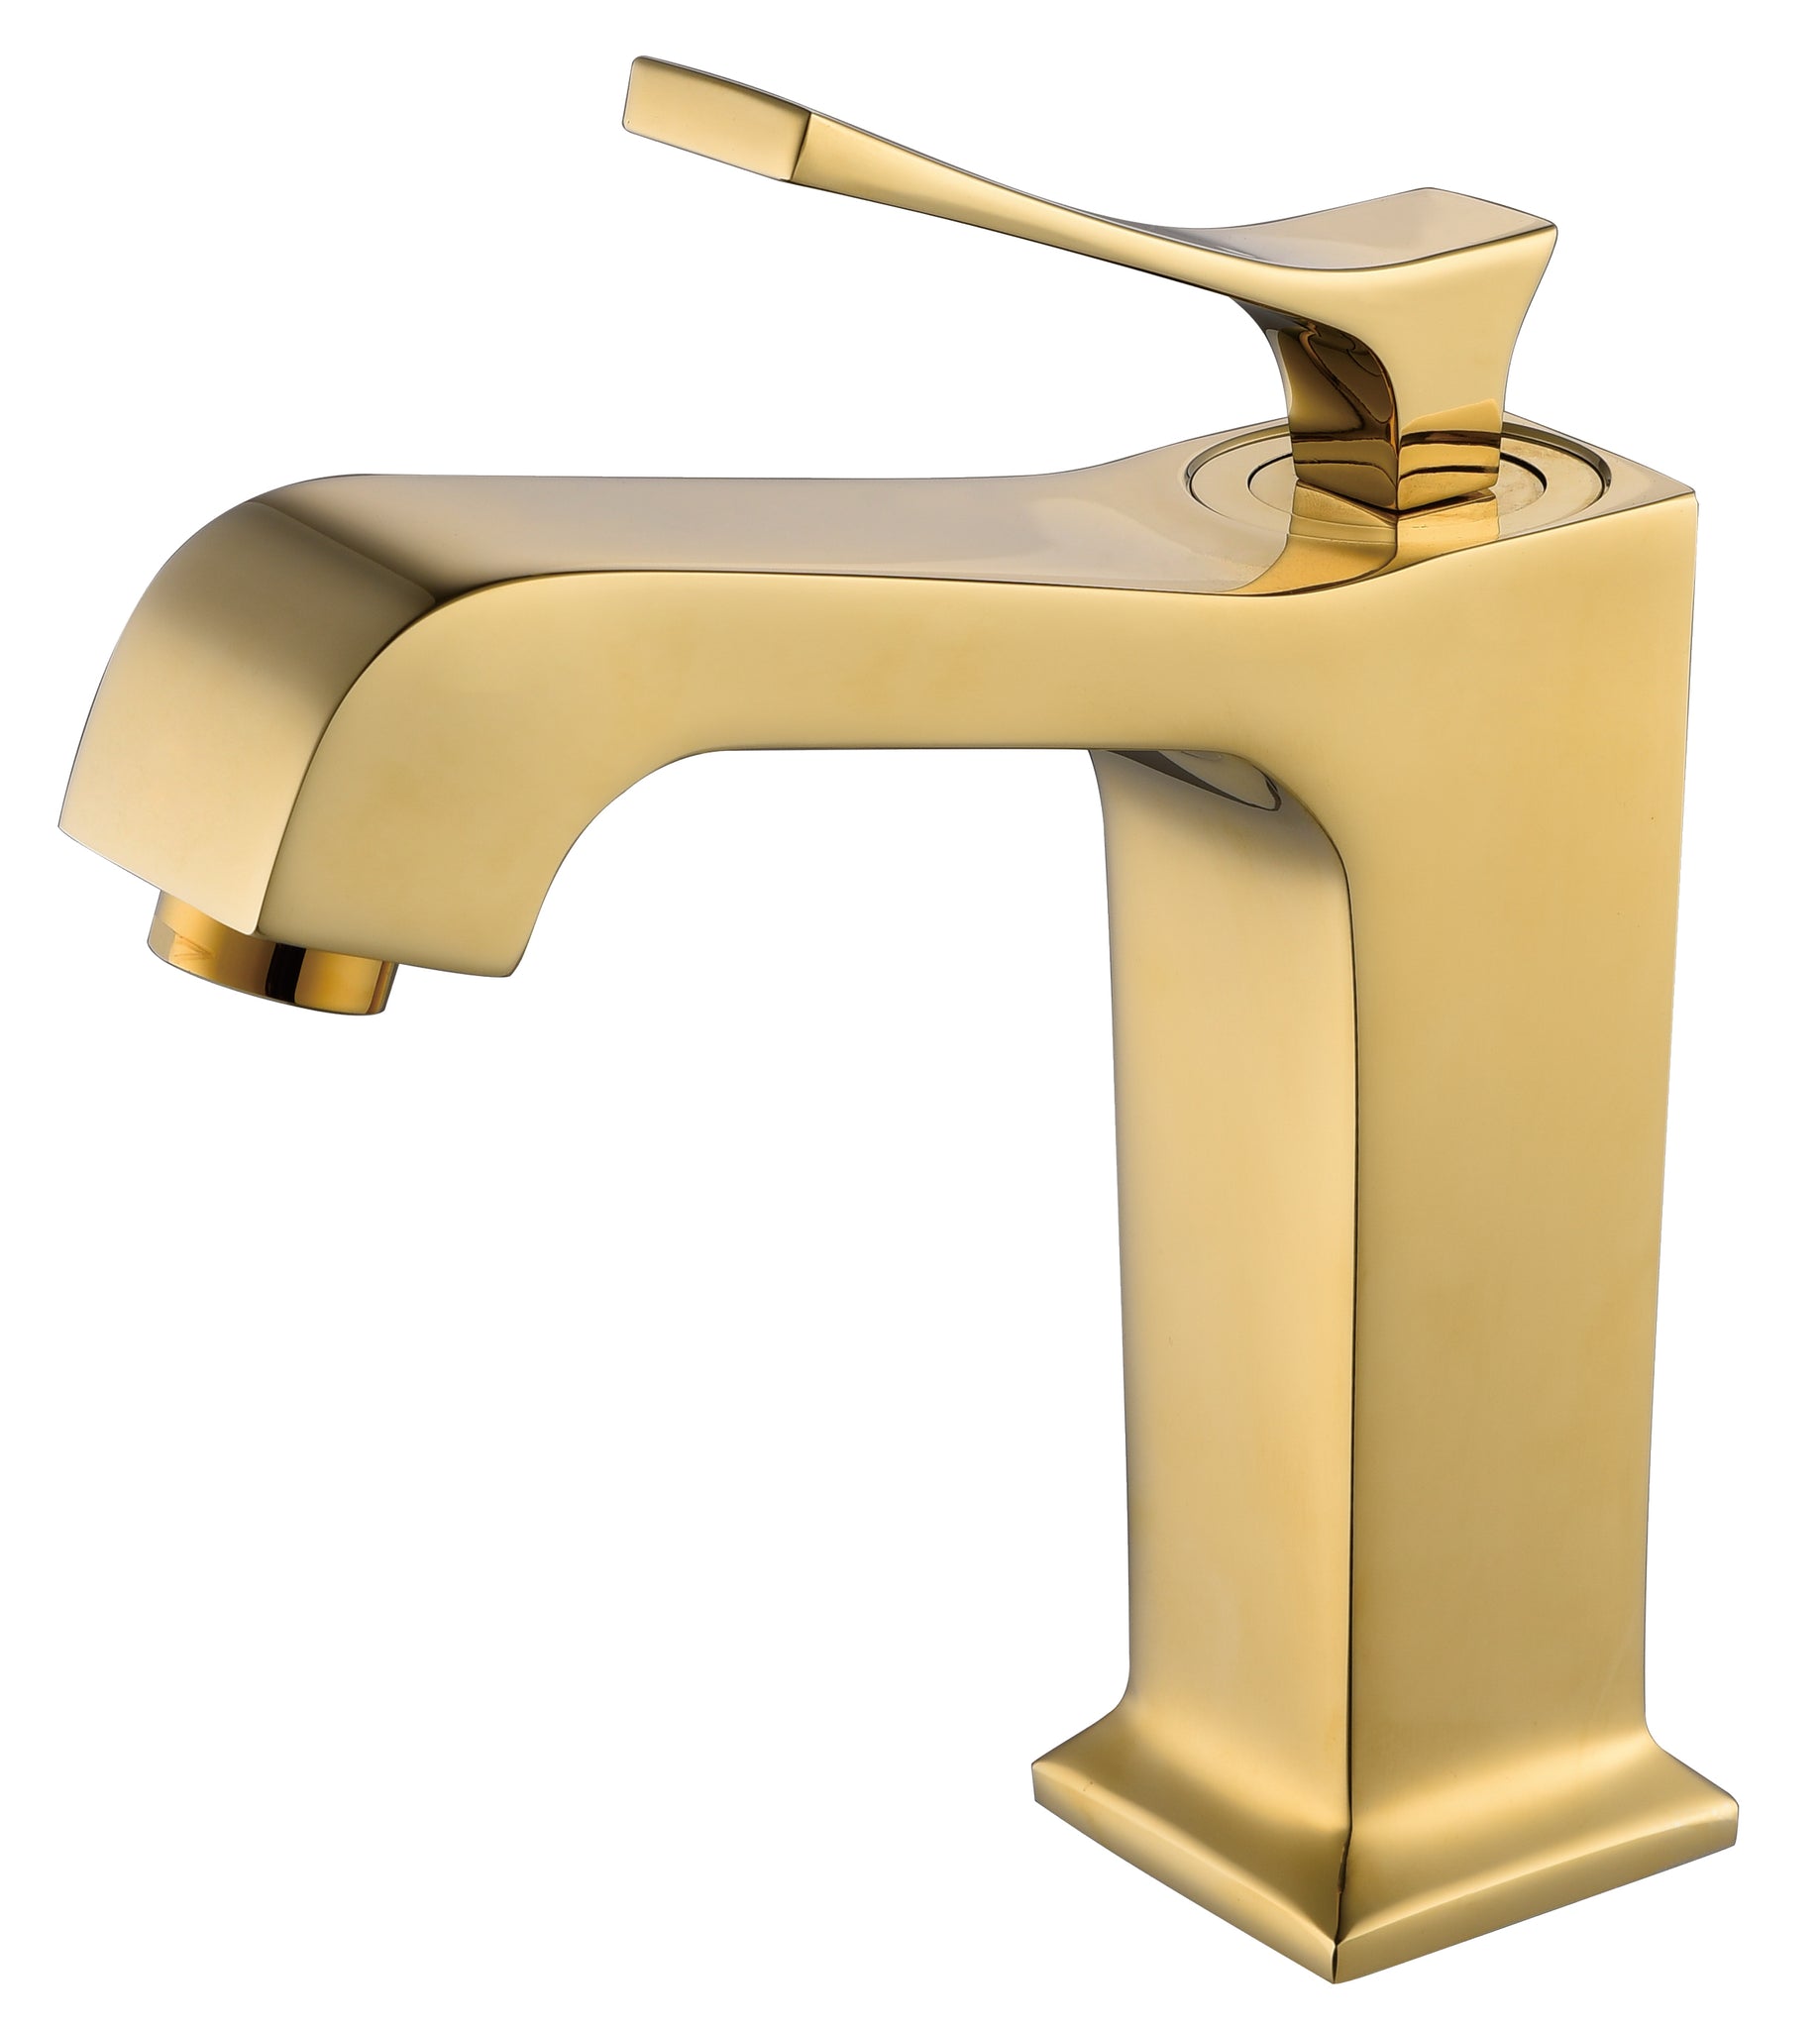 VICTORIA  FAUCET GOLD  WITH POP UP DRAIN  $ 240